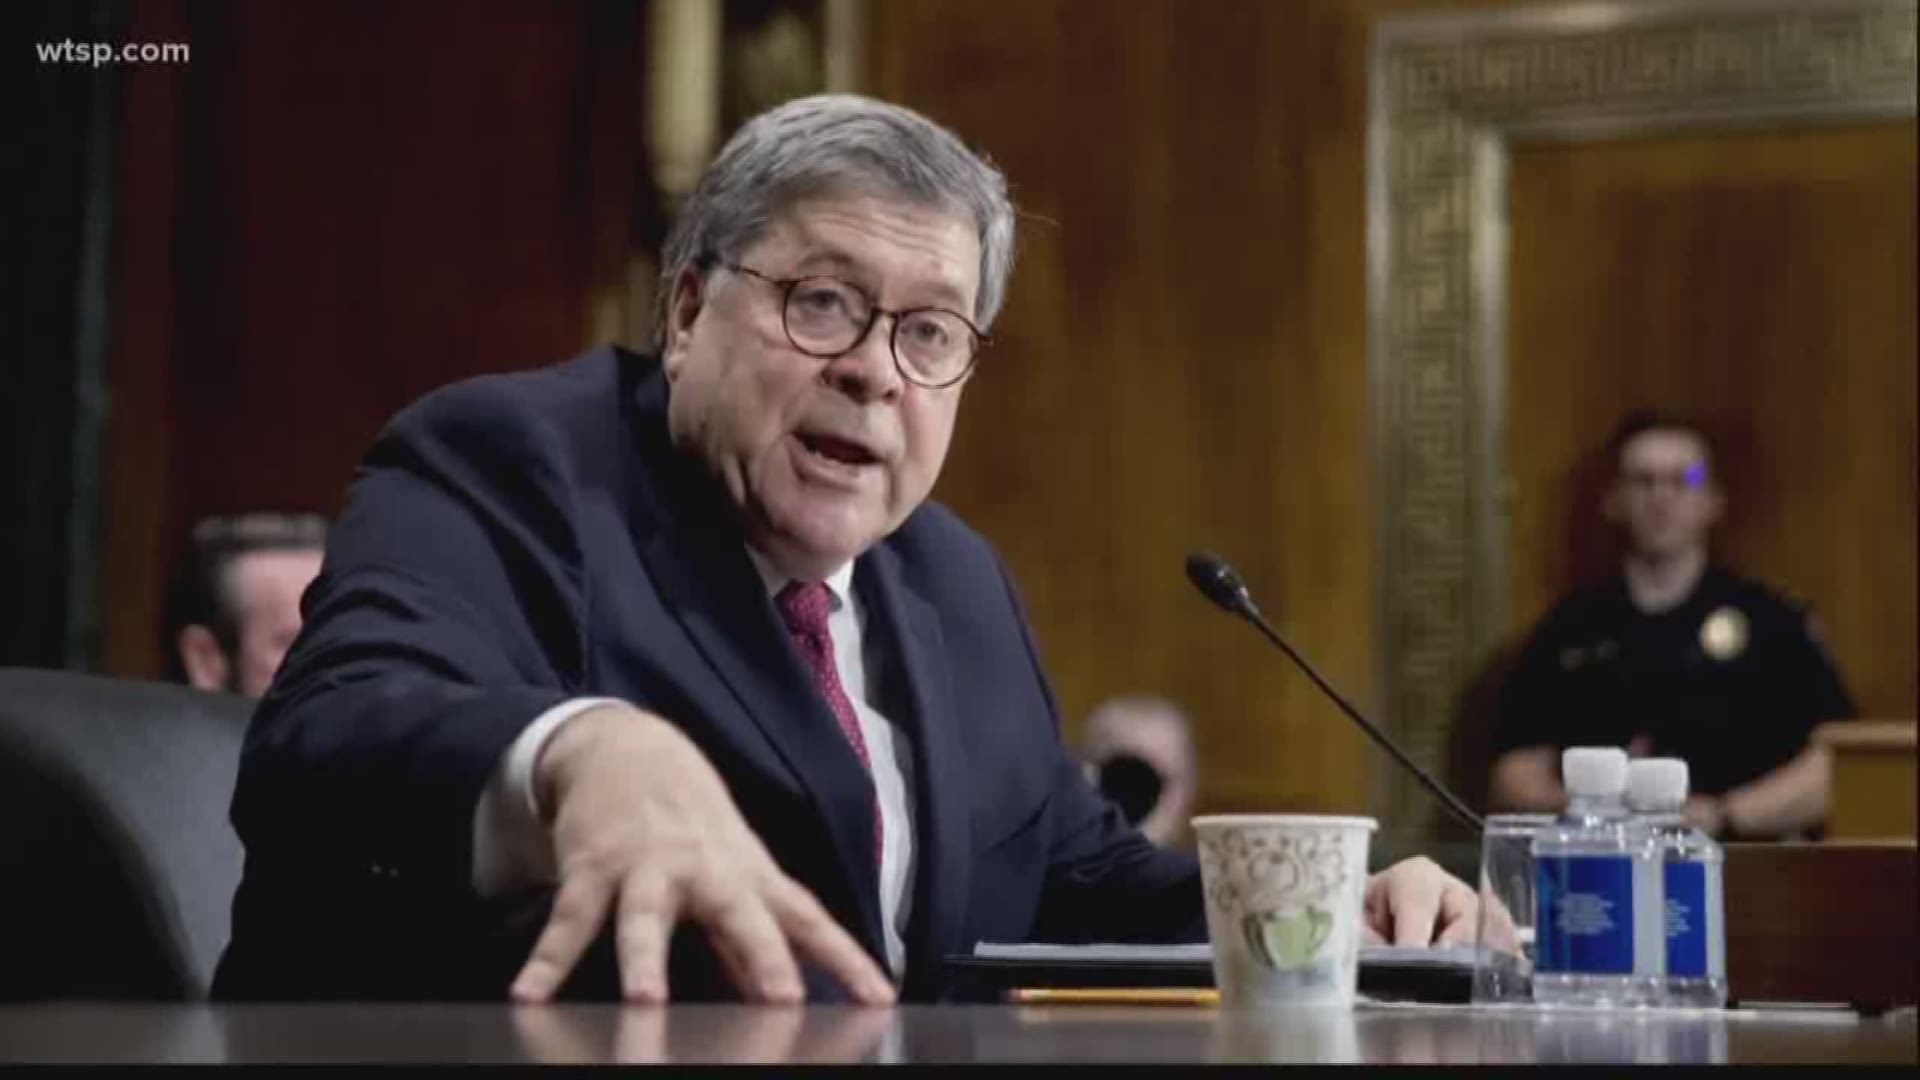 The House Judiciary Committee has voted to hold Attorney General William Barr in contempt of Congress, escalating the legal battle with the Trump administration over access to special counsel Robert Mueller's report. https://on.wtsp.com/2vKqyeY